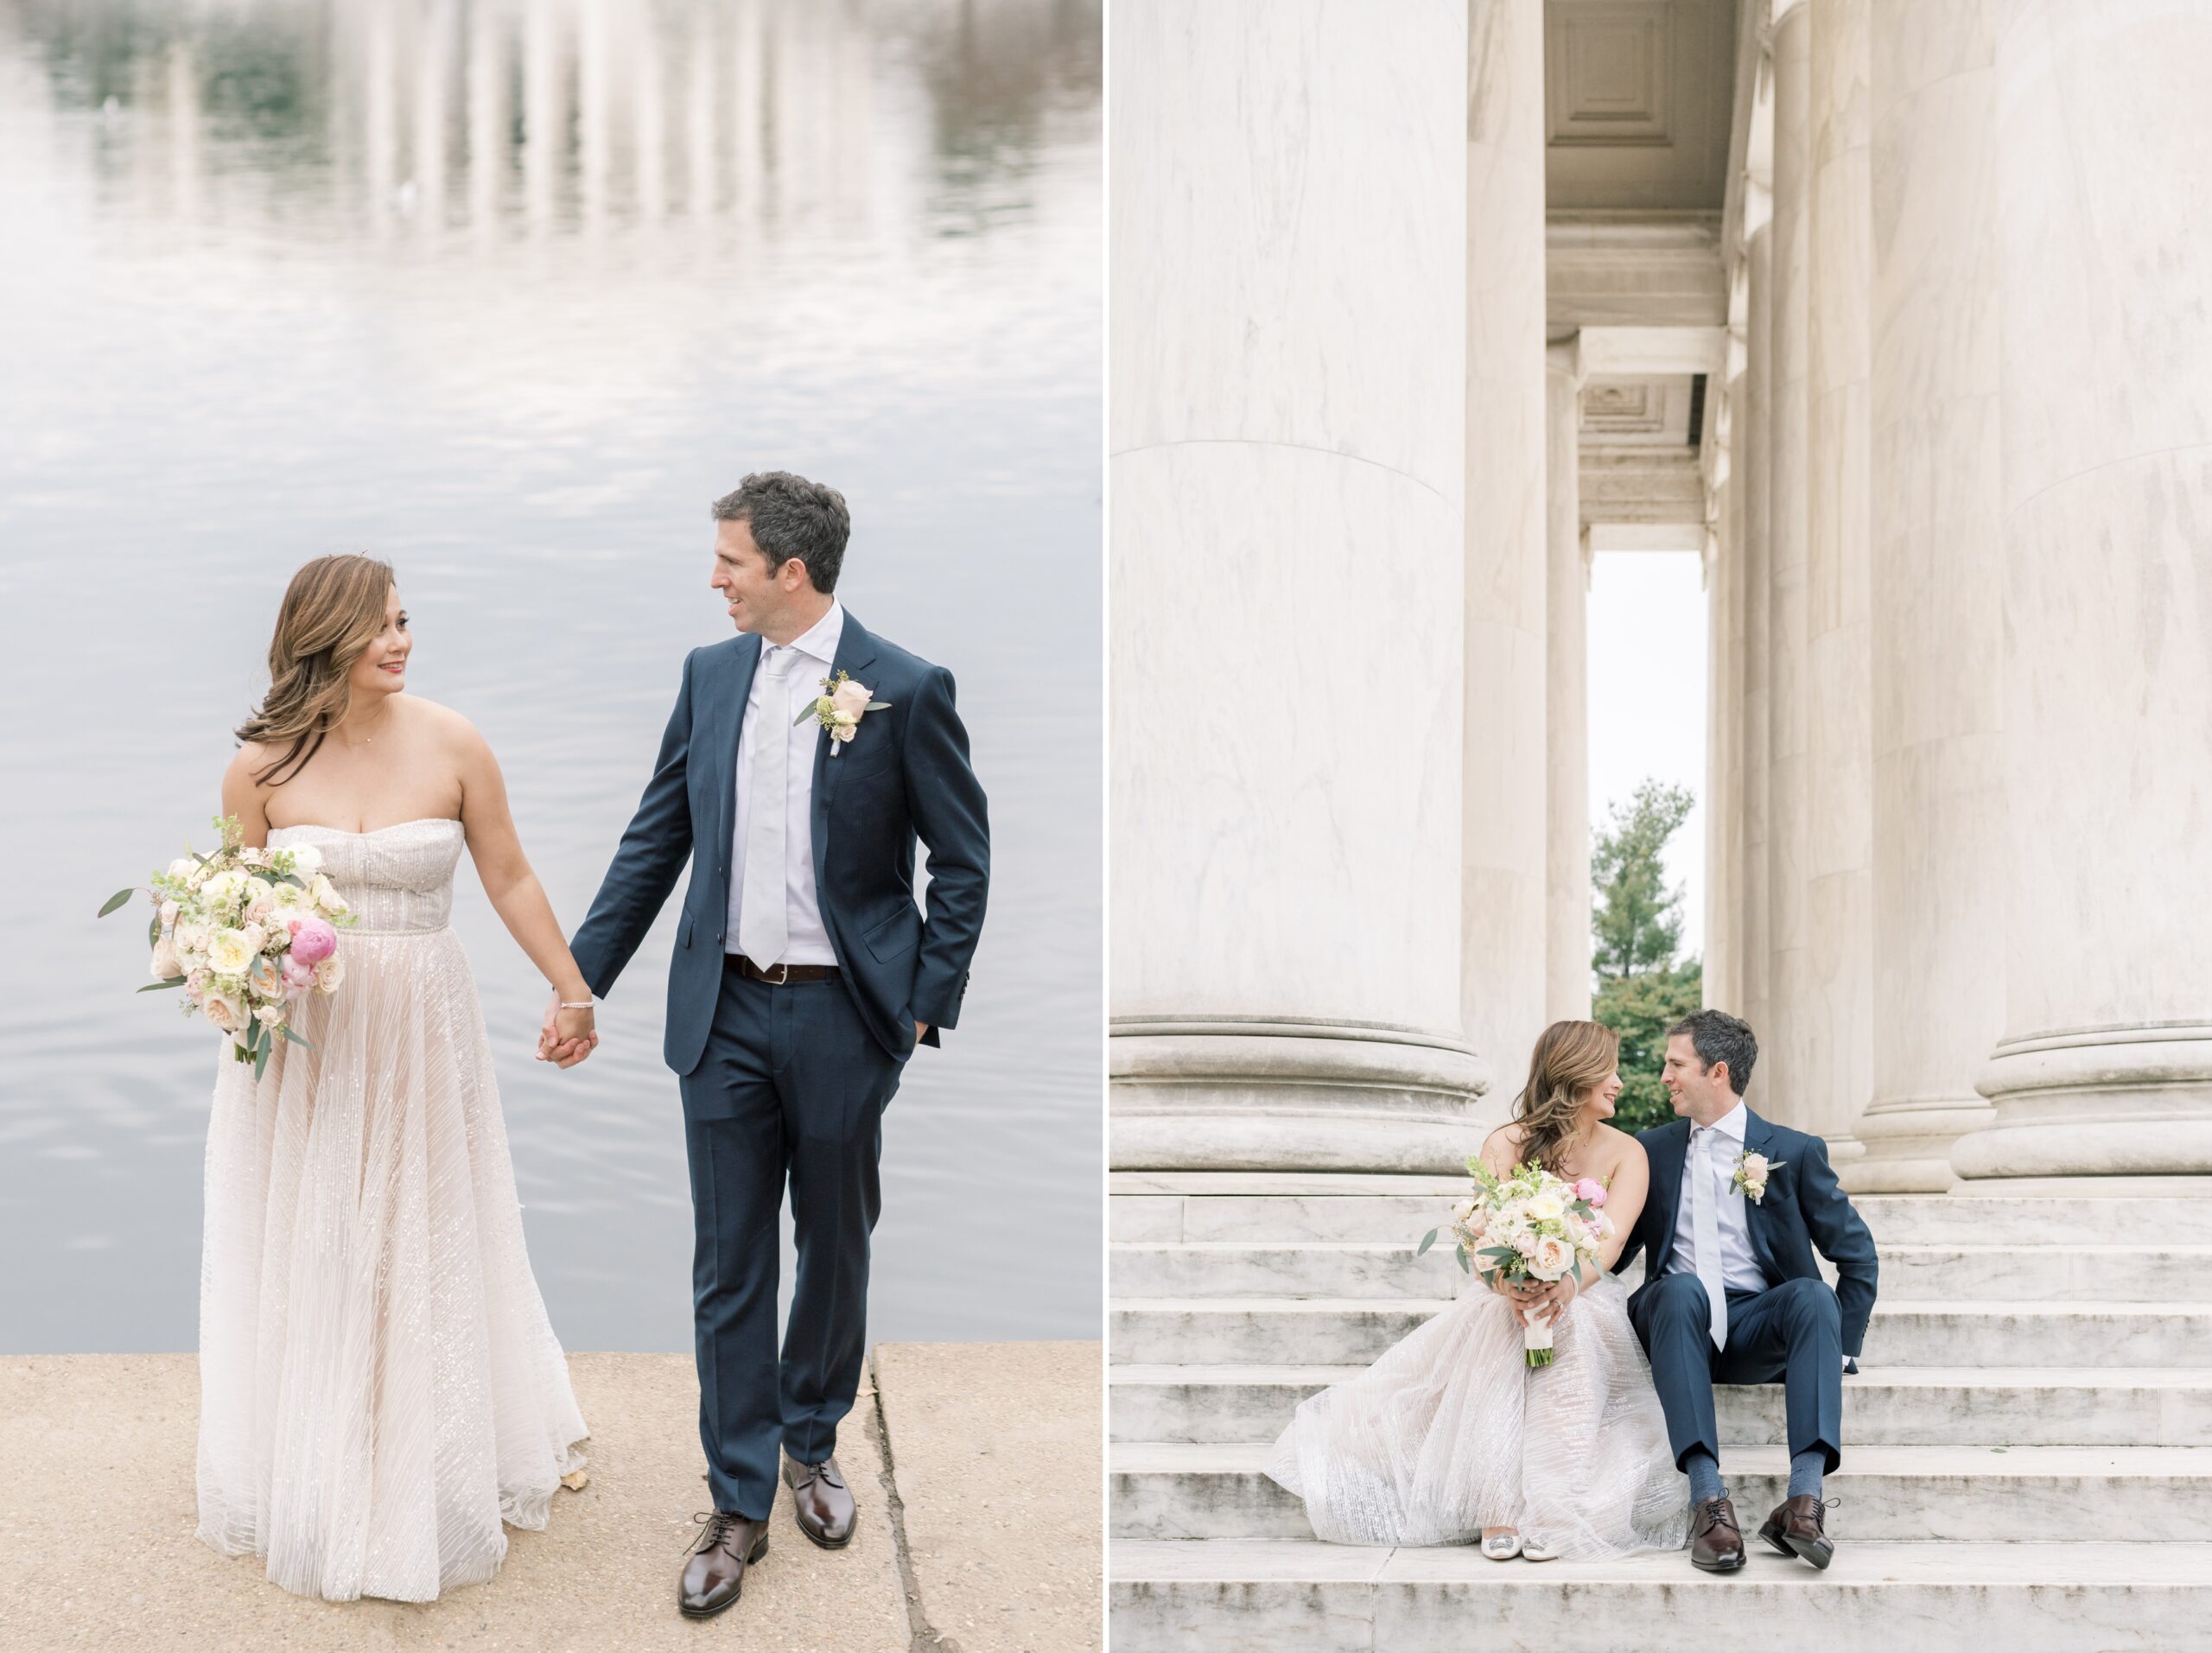 An intimate elopement that takes place in Washington, DC at the Hay Adams hotel and the Jefferson Memorial.